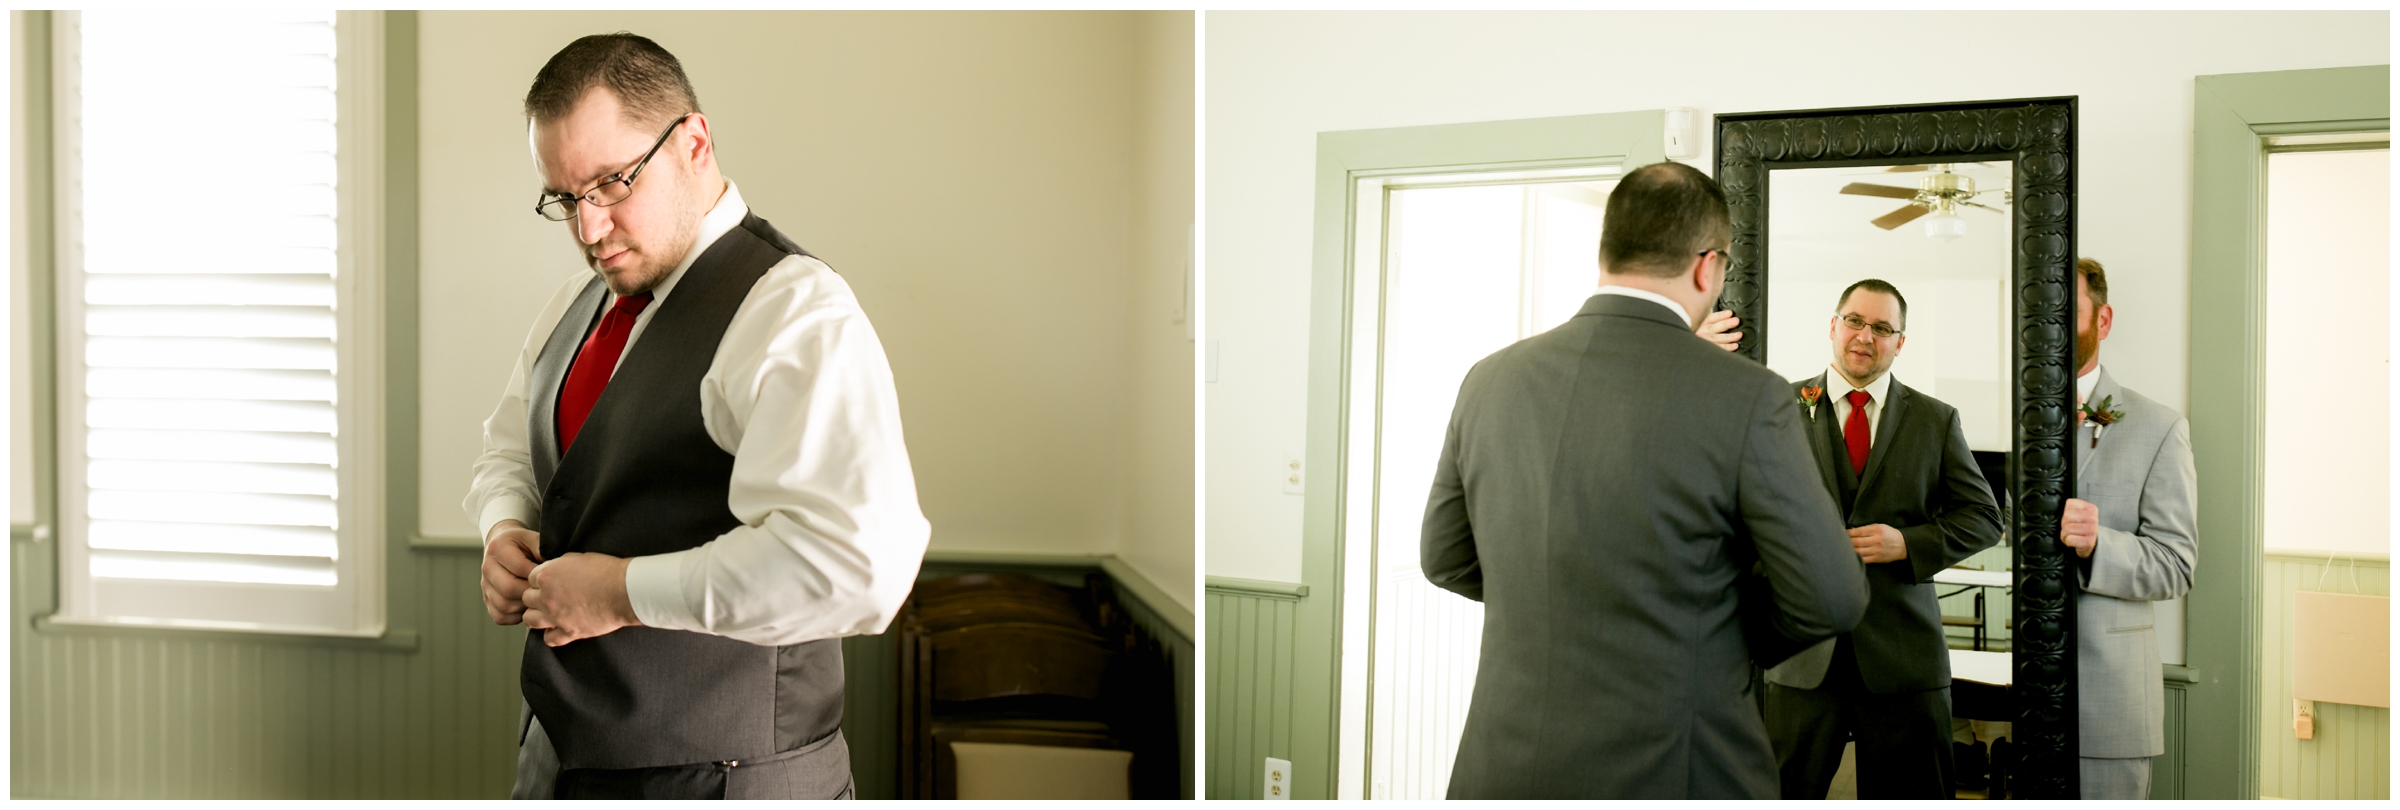 groom getting ready at Chatfield Gardens school house 